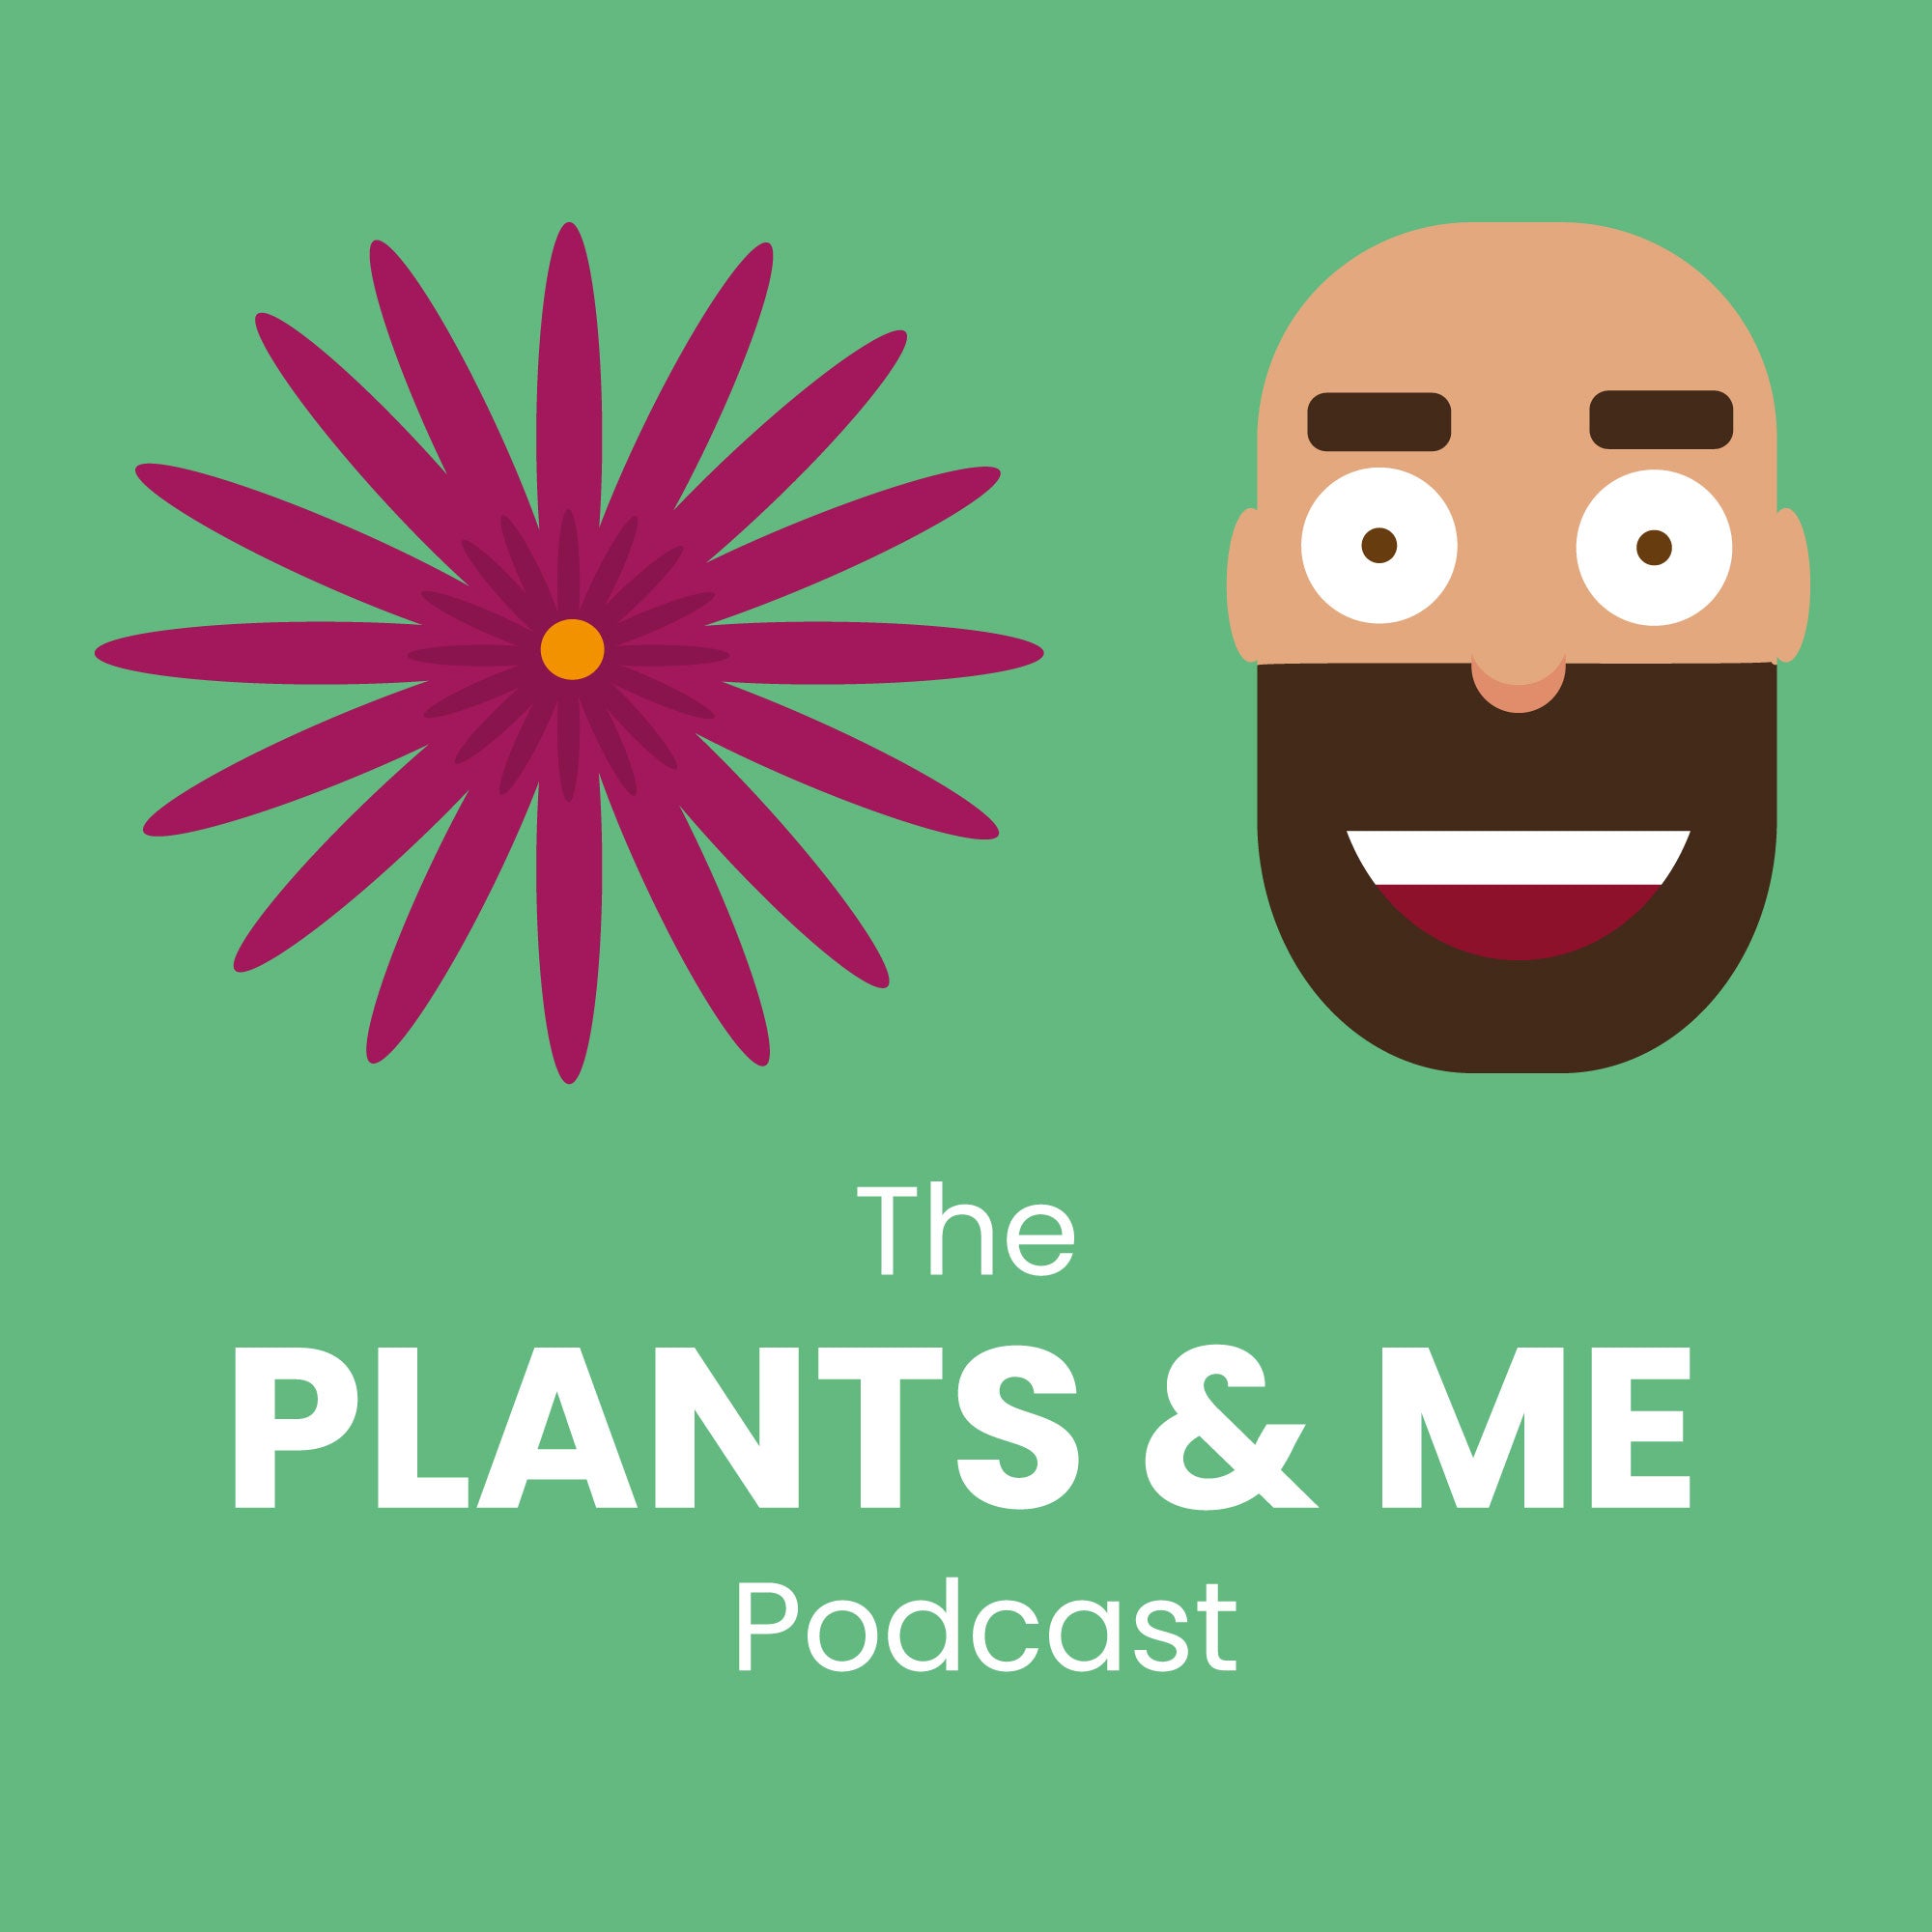 EP44 - Sowing & growing: How we do it and some tips for how you can too